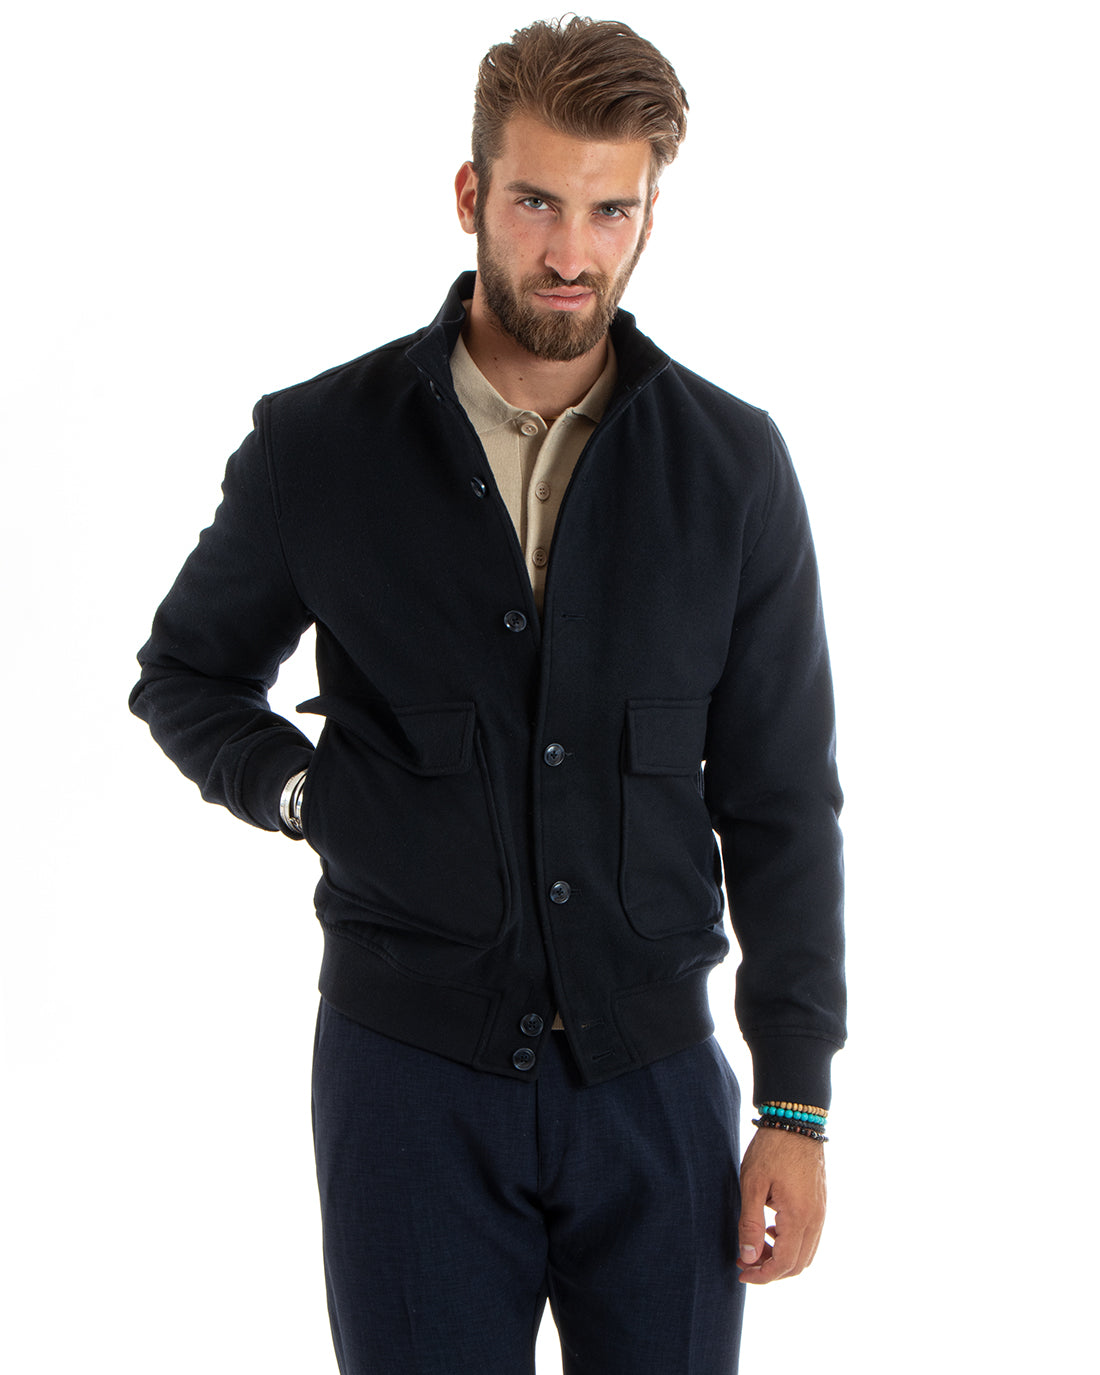 Men's Jacket Wool Bomber Cloth Jacket With Buttons Flap Pockets Casual Blue GIOSAL-G3093A